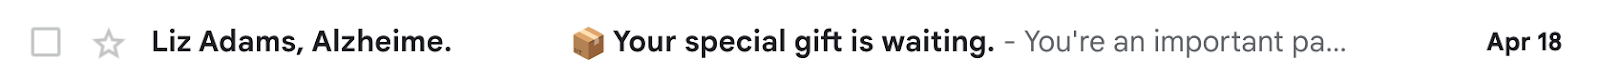 email subject line, Your special gift is waiting.